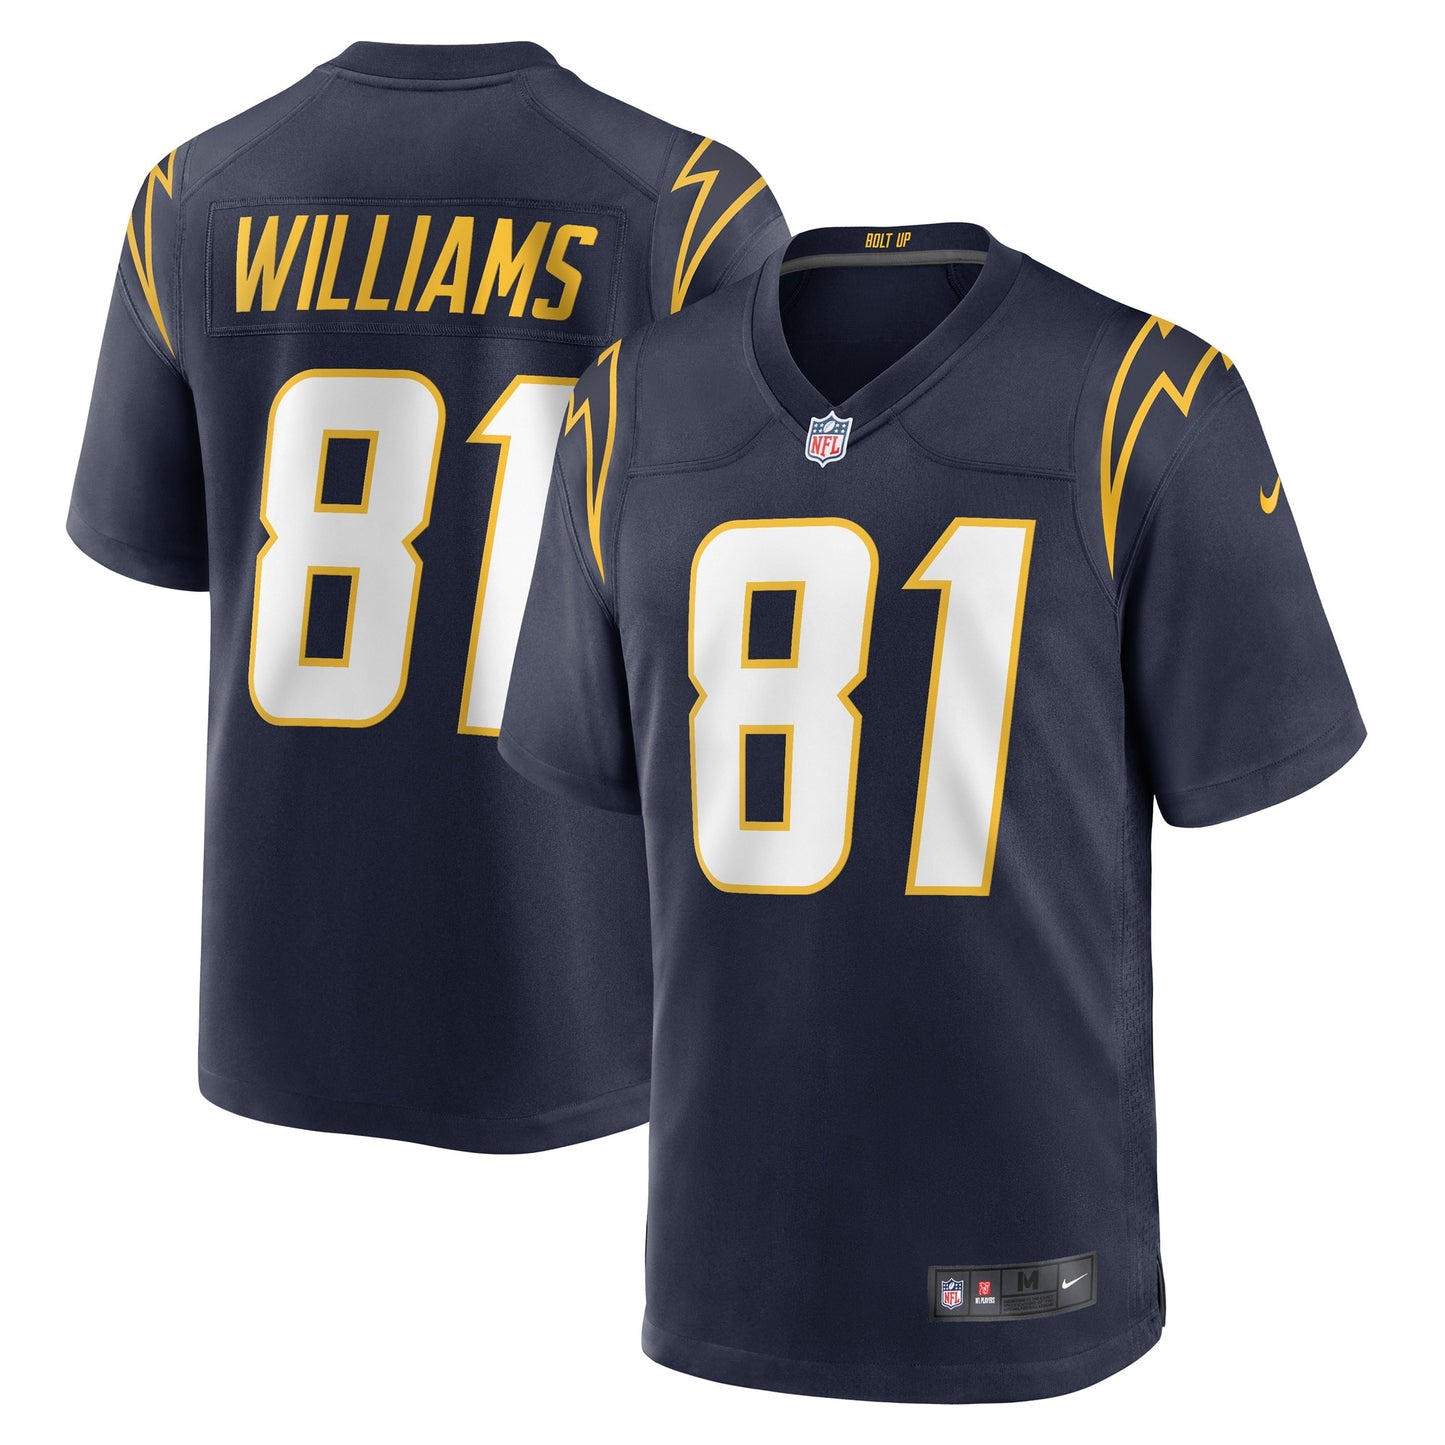 Mike Williams Los Angeles Chargers Nike Alternate Team Game Jersey - Navy